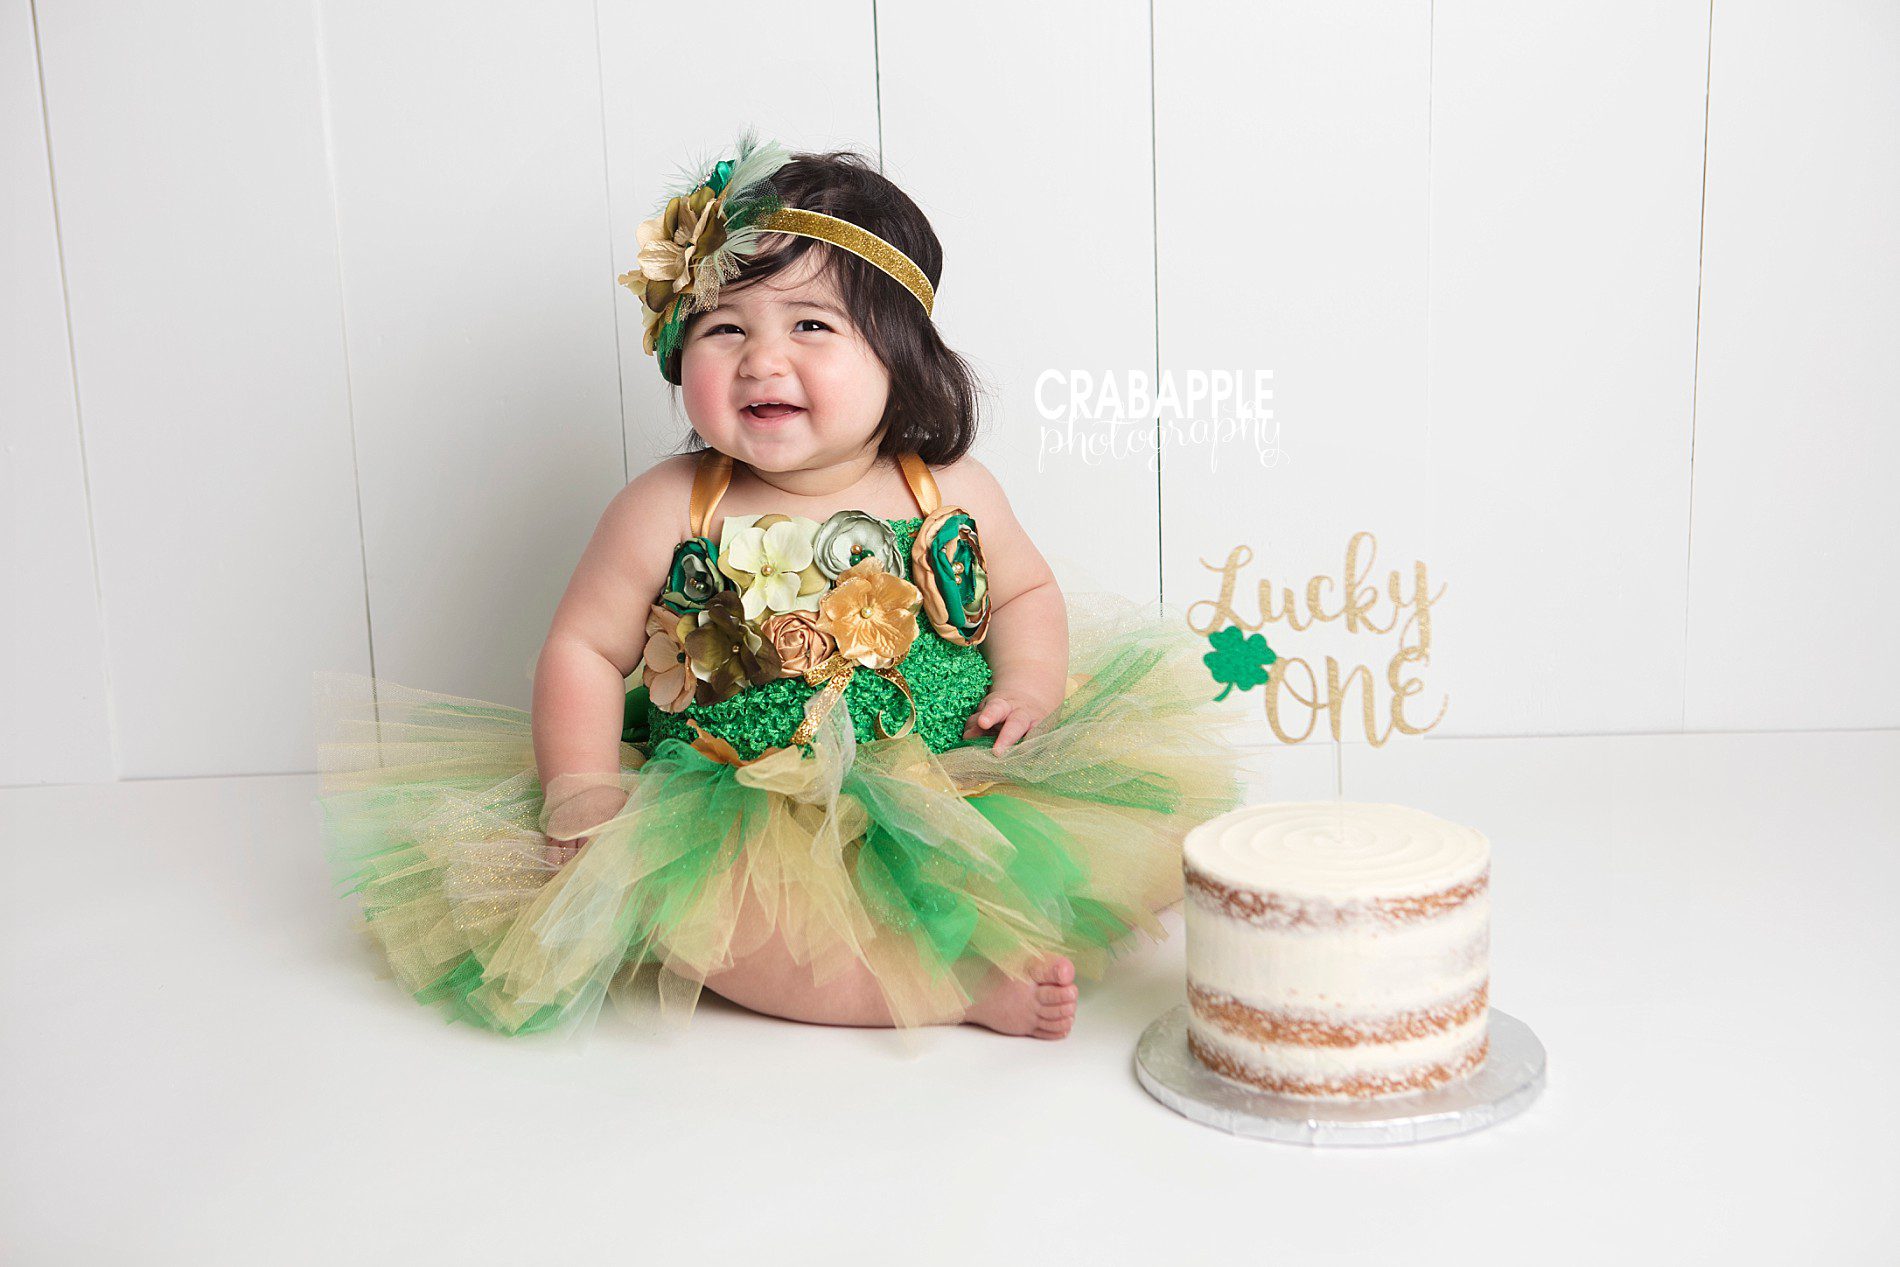 st patrick's day lucky one cake smash for girls first birthday ideas